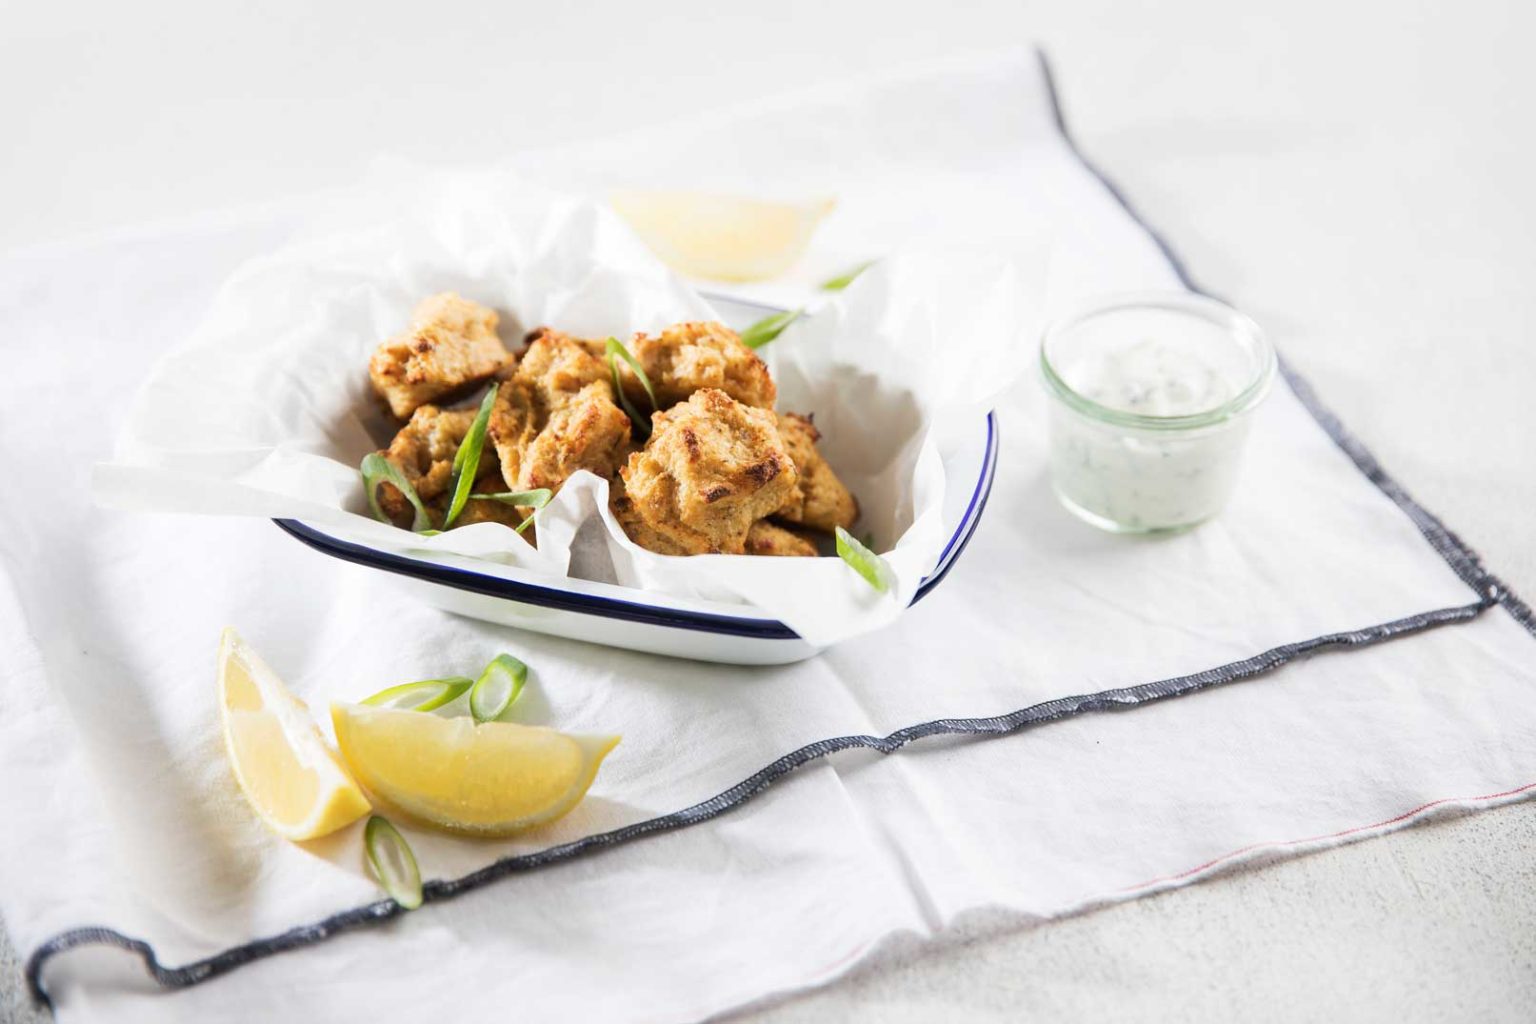 Cauliflower nuggets on baking paper in a small serving dish with dipping sauce and lemon wedges to serve.